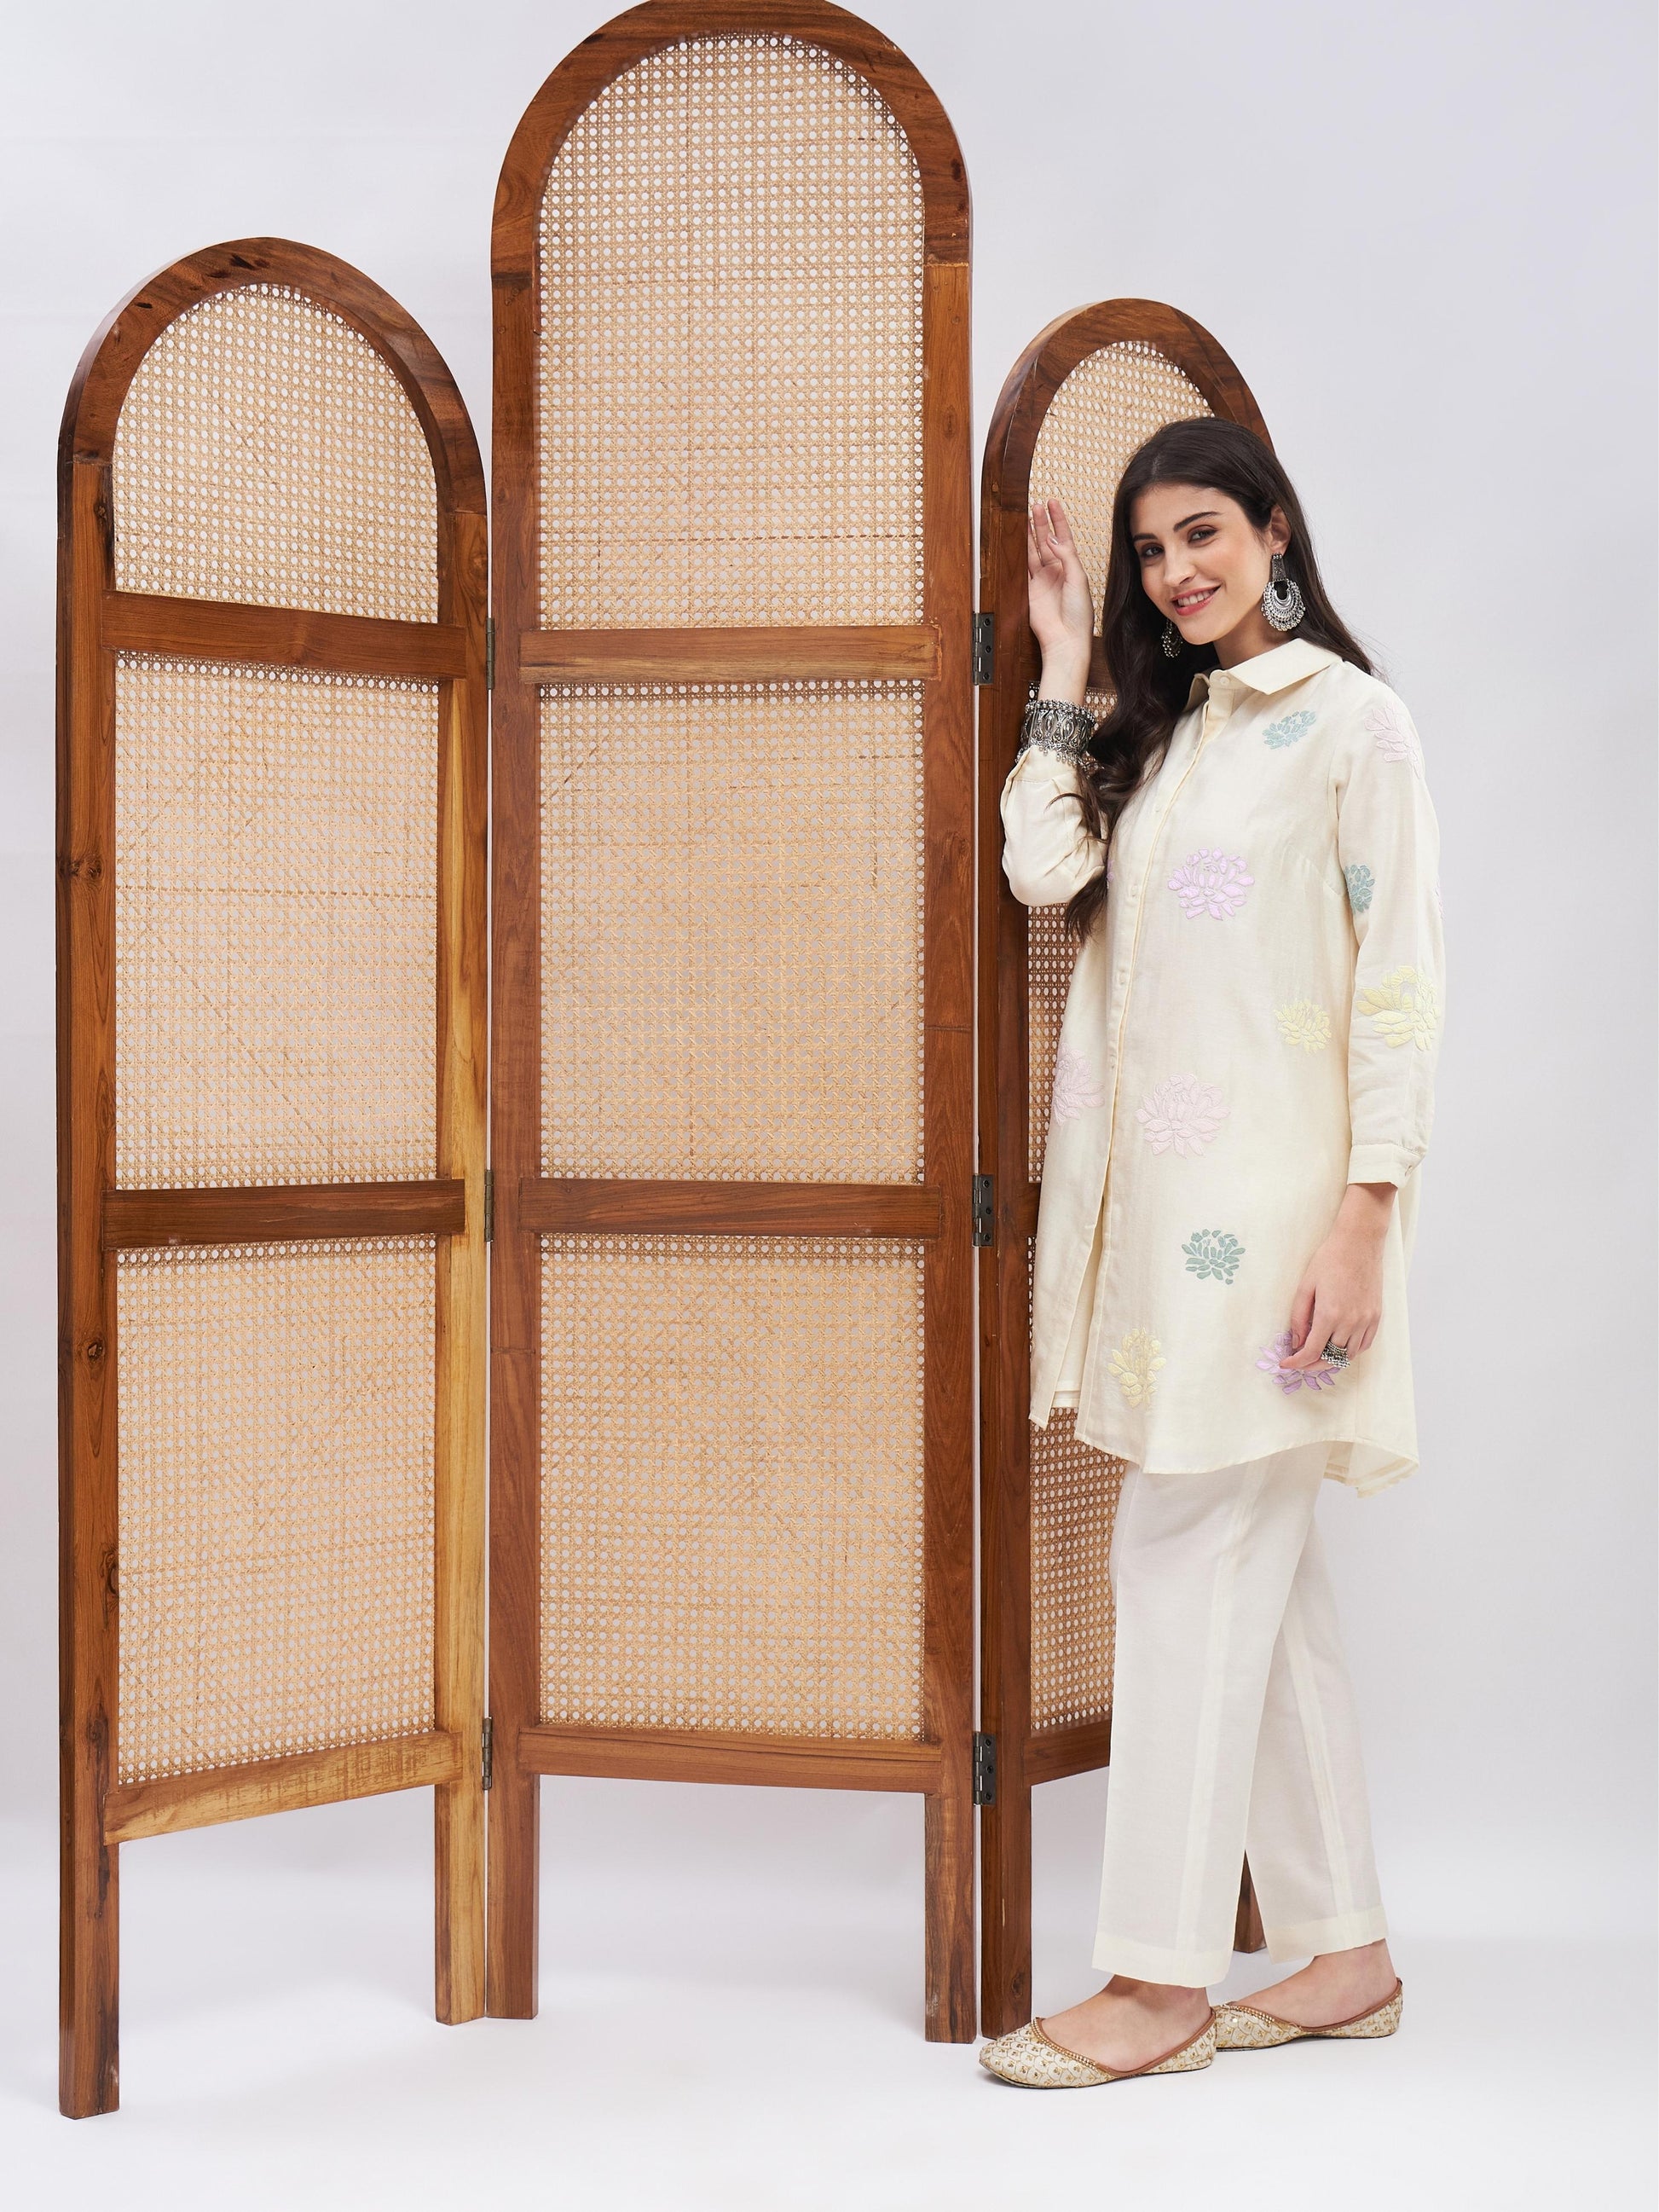 Off-White Resham Embroidered Kurta Set at Kamakhyaa by RoohbyRidhimaa. This item is Cotton Mulmul, Kurta Sets, Off-white, Office Wear, Relaxed Fit, Resham Embroidered, Silk Chanderi, Toxin free